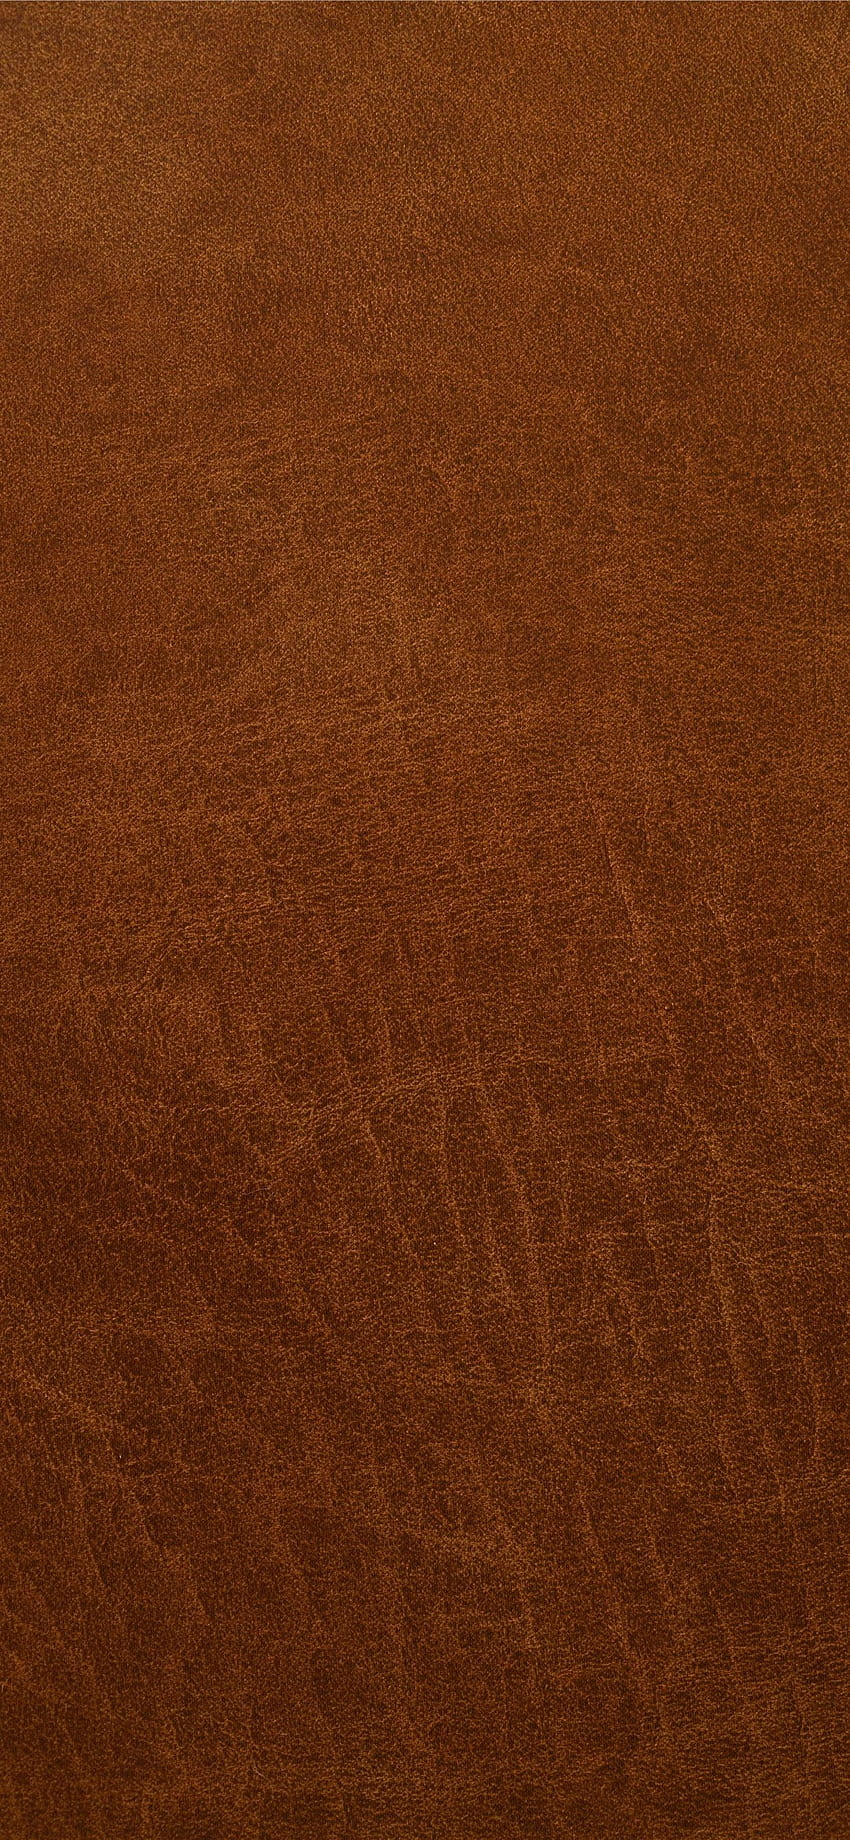 brown leather iPhone X, android leather HD phone wallpaper